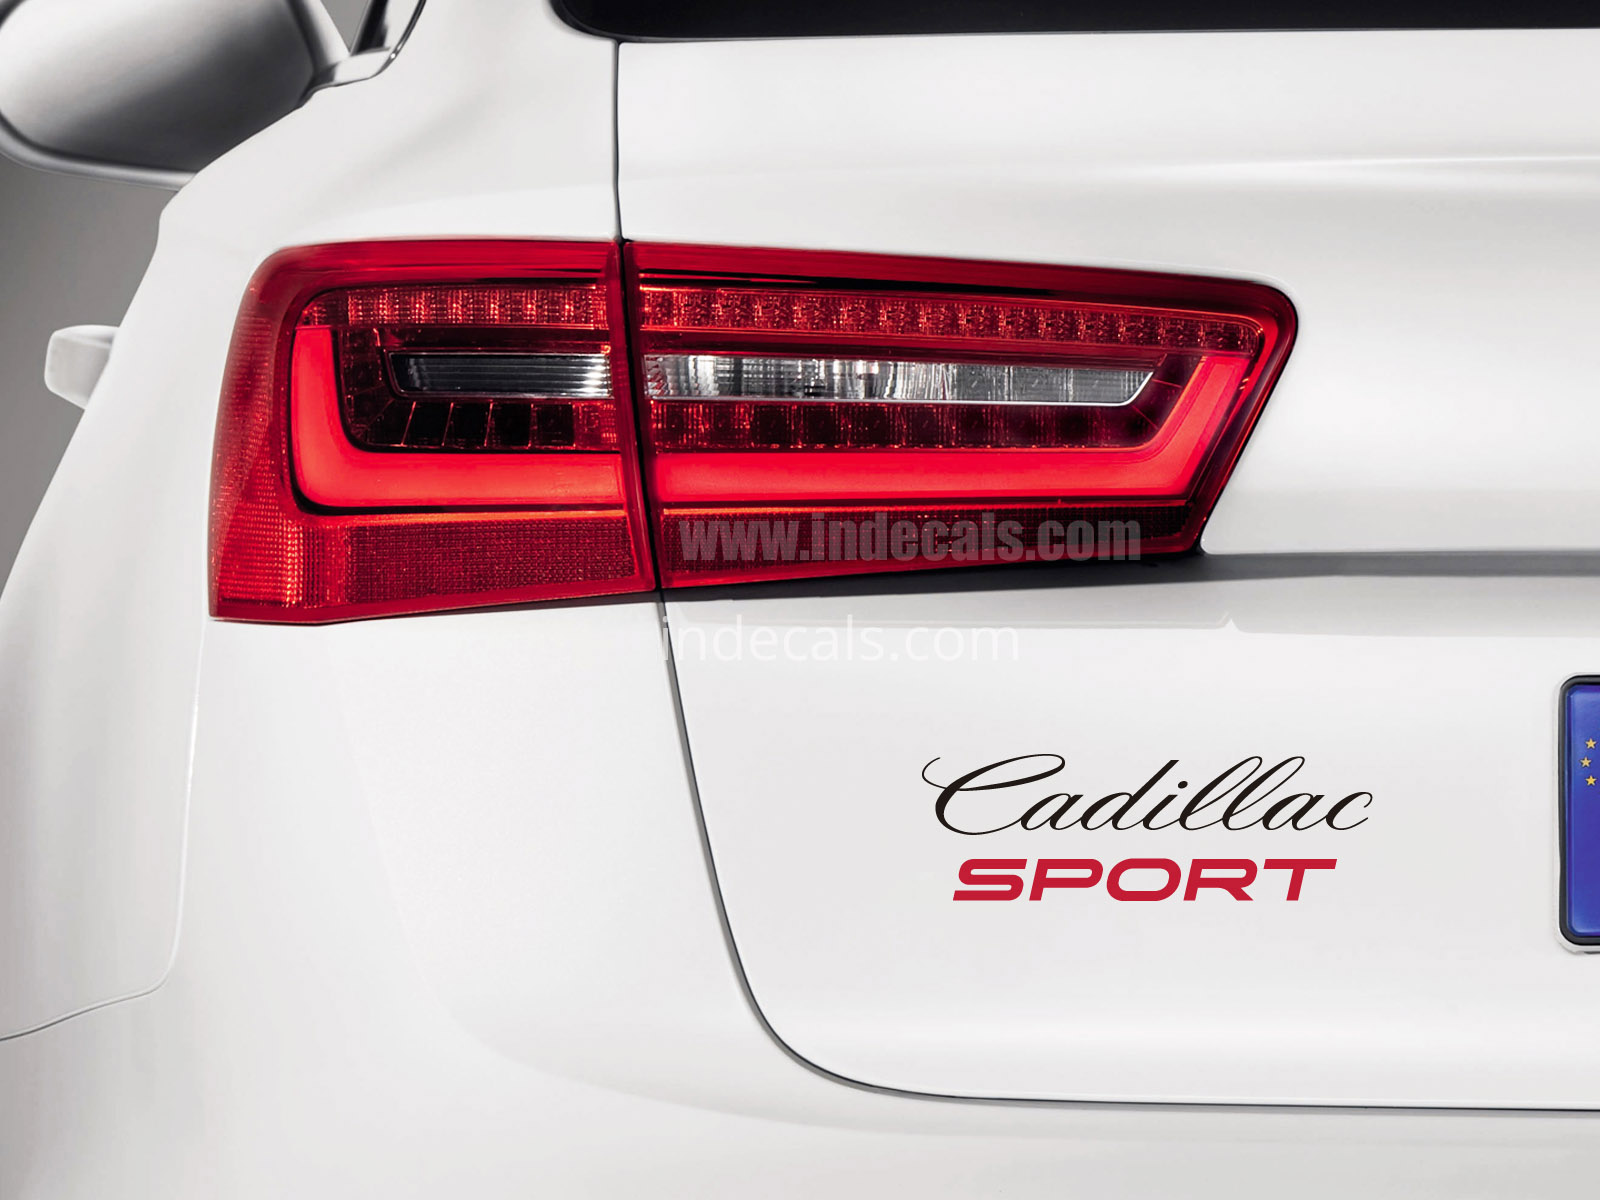 1 x Cadillac Sports Sticker for Trunk - Black & Red